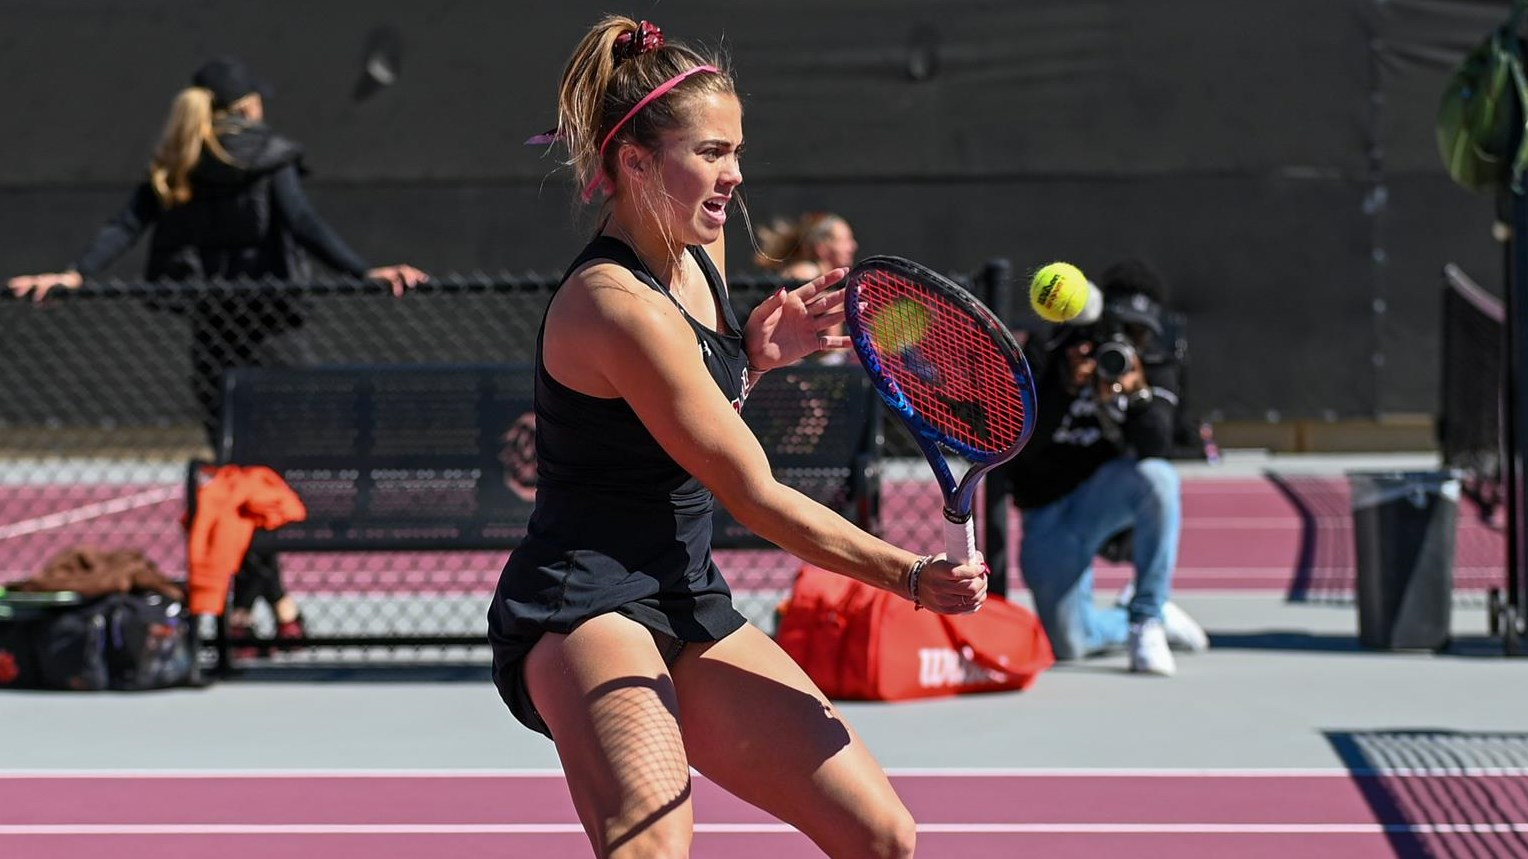 Hamner Selected as a Finalist for the 2022 Honda Sport Award for Tennis